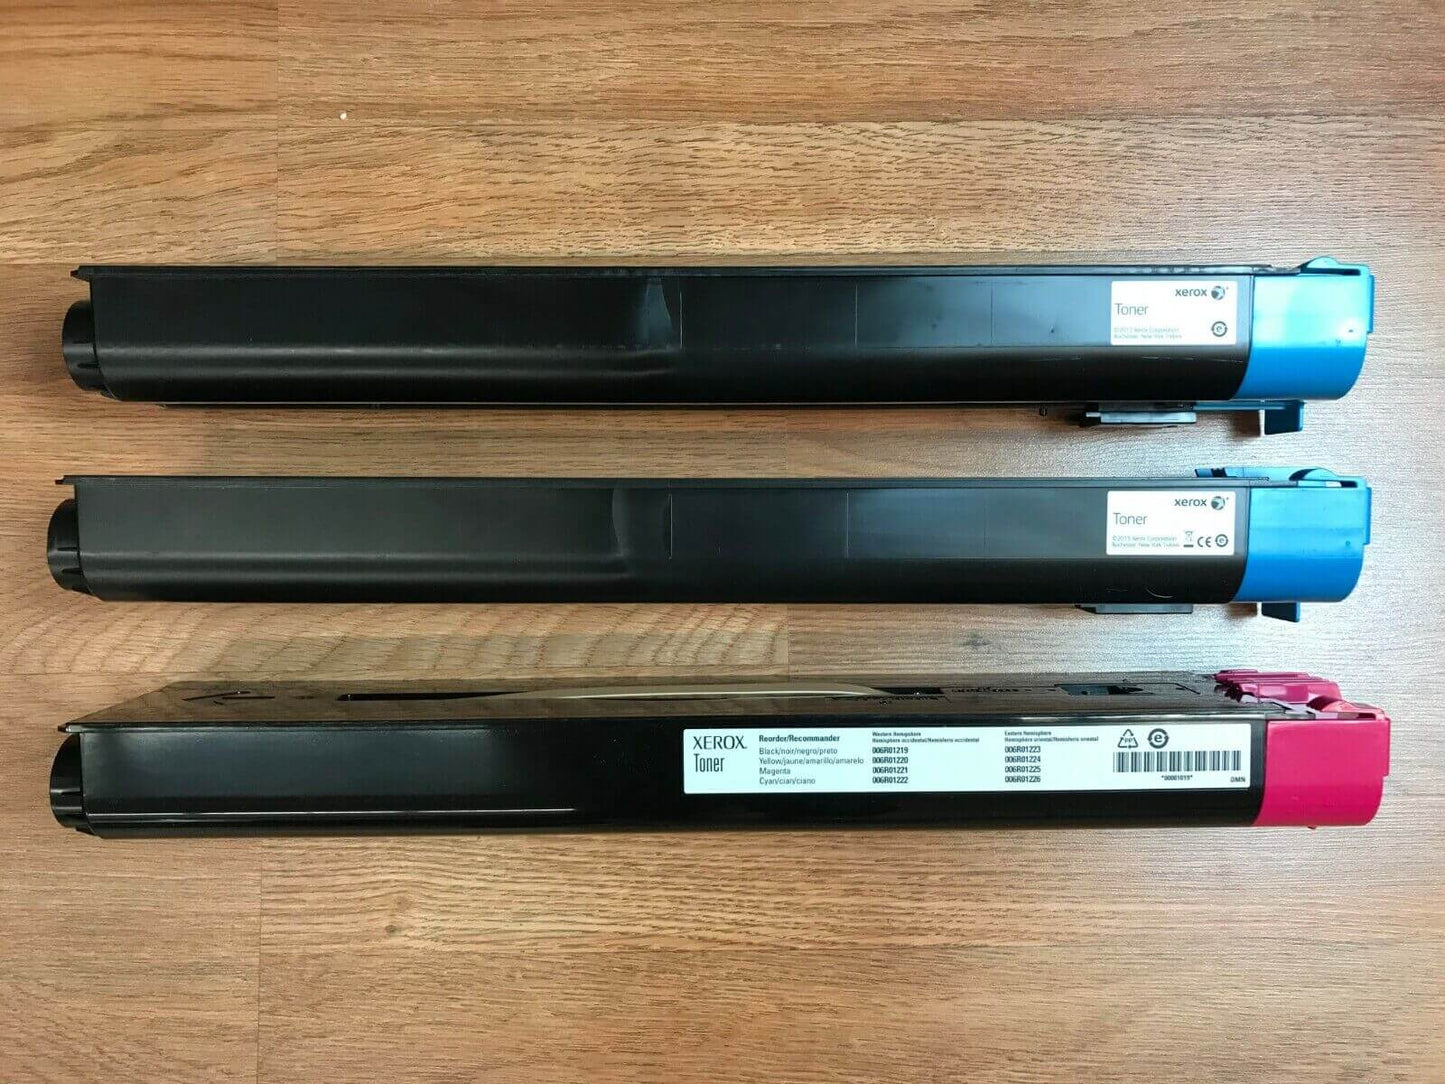 3 Open Xerox 006R01221, 006R01222 CCM Toner For DC 240/WC 7655 *FedEx 2Day Air!* - copier-clearance-center